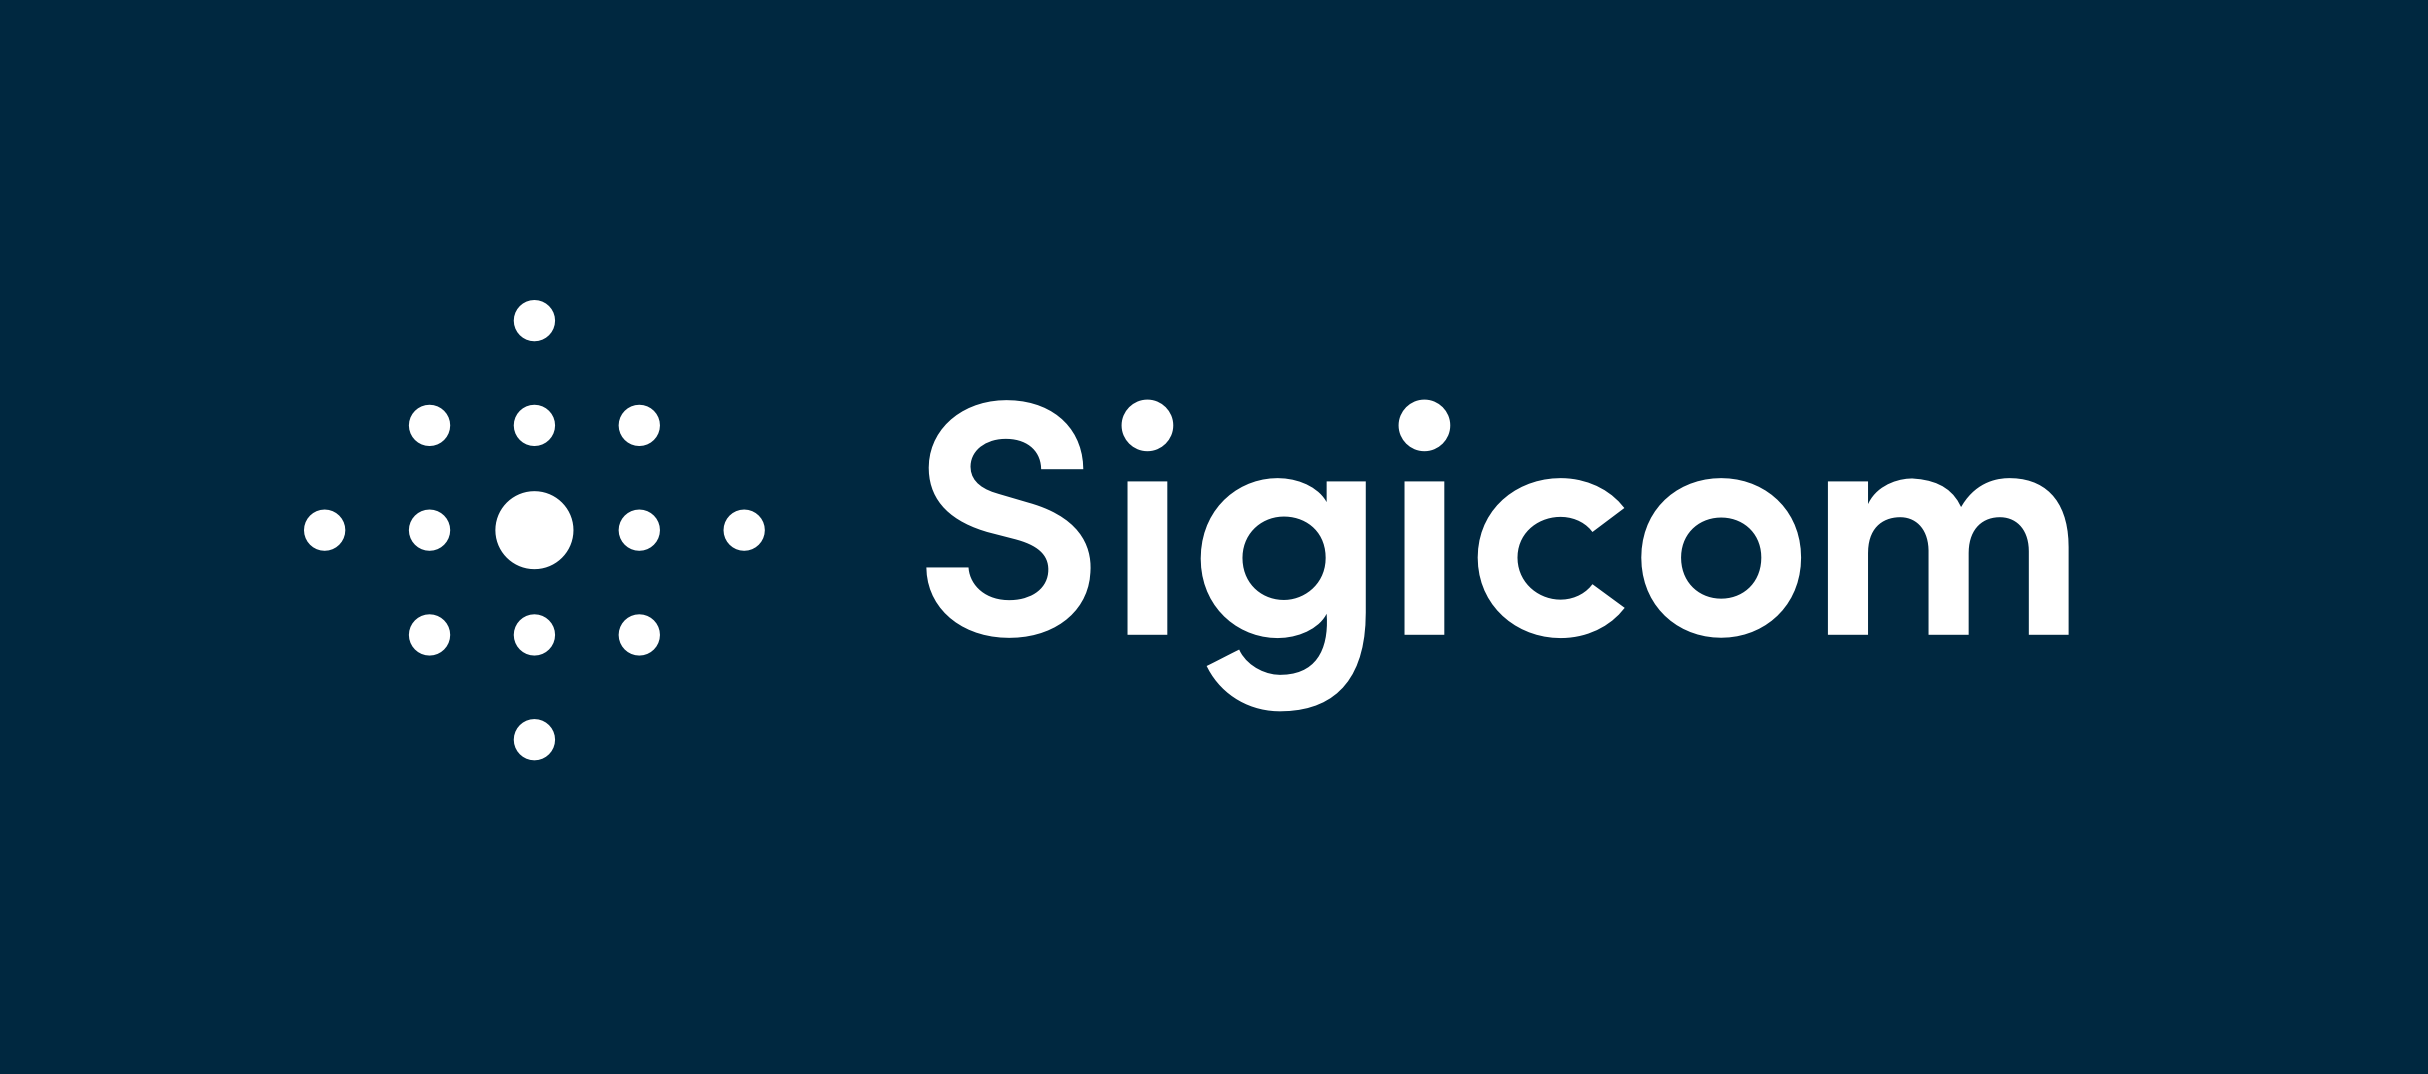 Digital strategy and design for Sigicom brand. Material from the process. The Sigicom logotype in white on blue background.